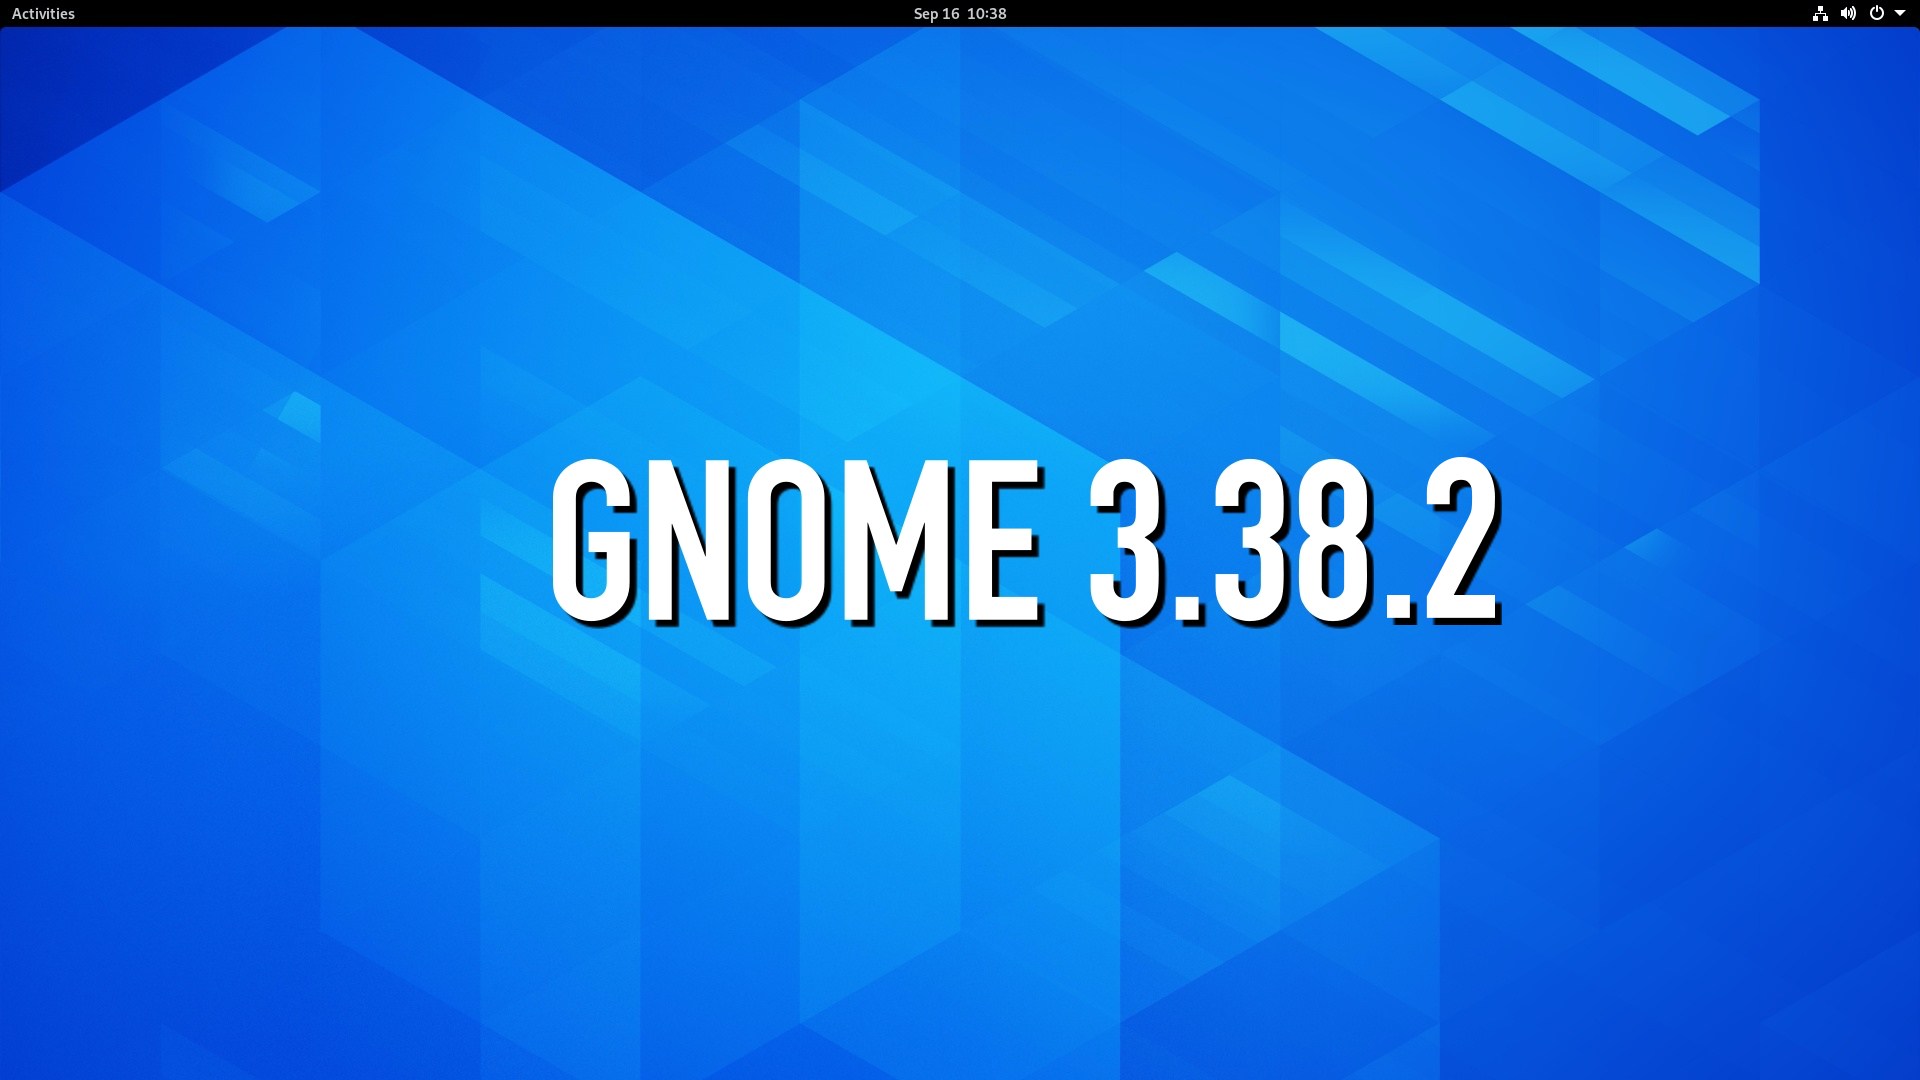 GNOME 3.38.2 Desktop Environment Is Out with Even More Improvements and Bug Fixes